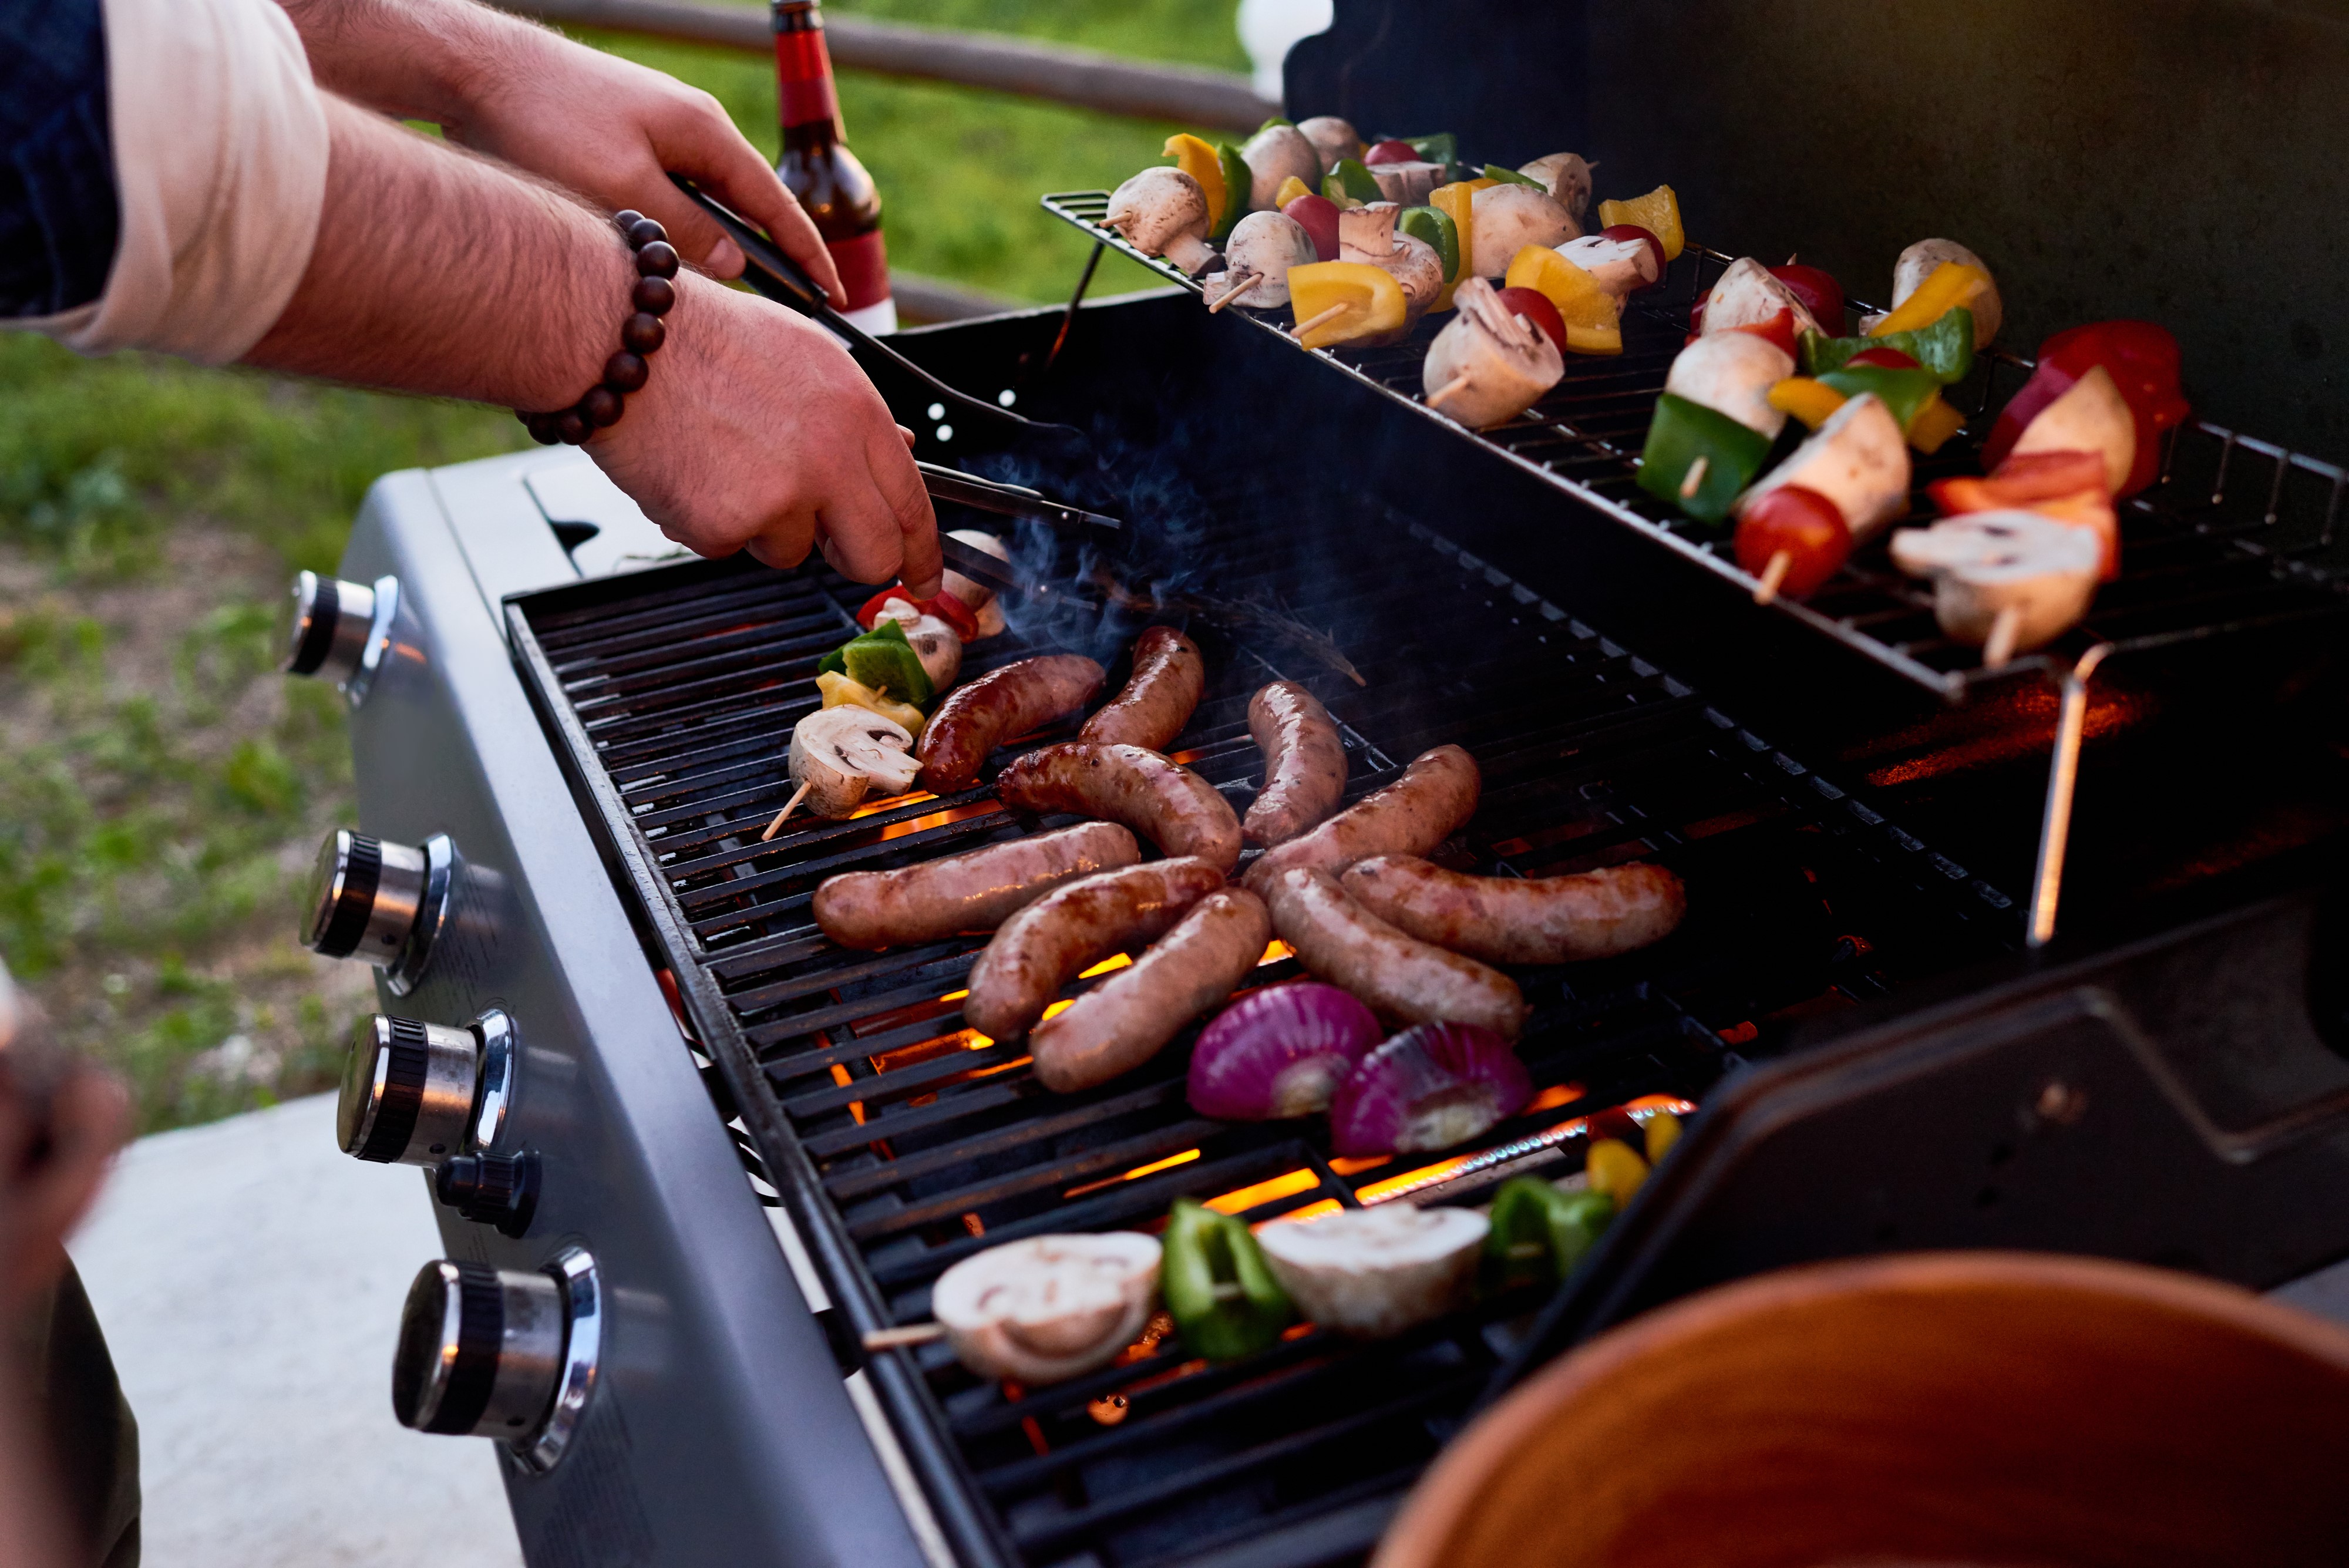 a close up on a person barbecuing meat and vegetables on a propane bbq